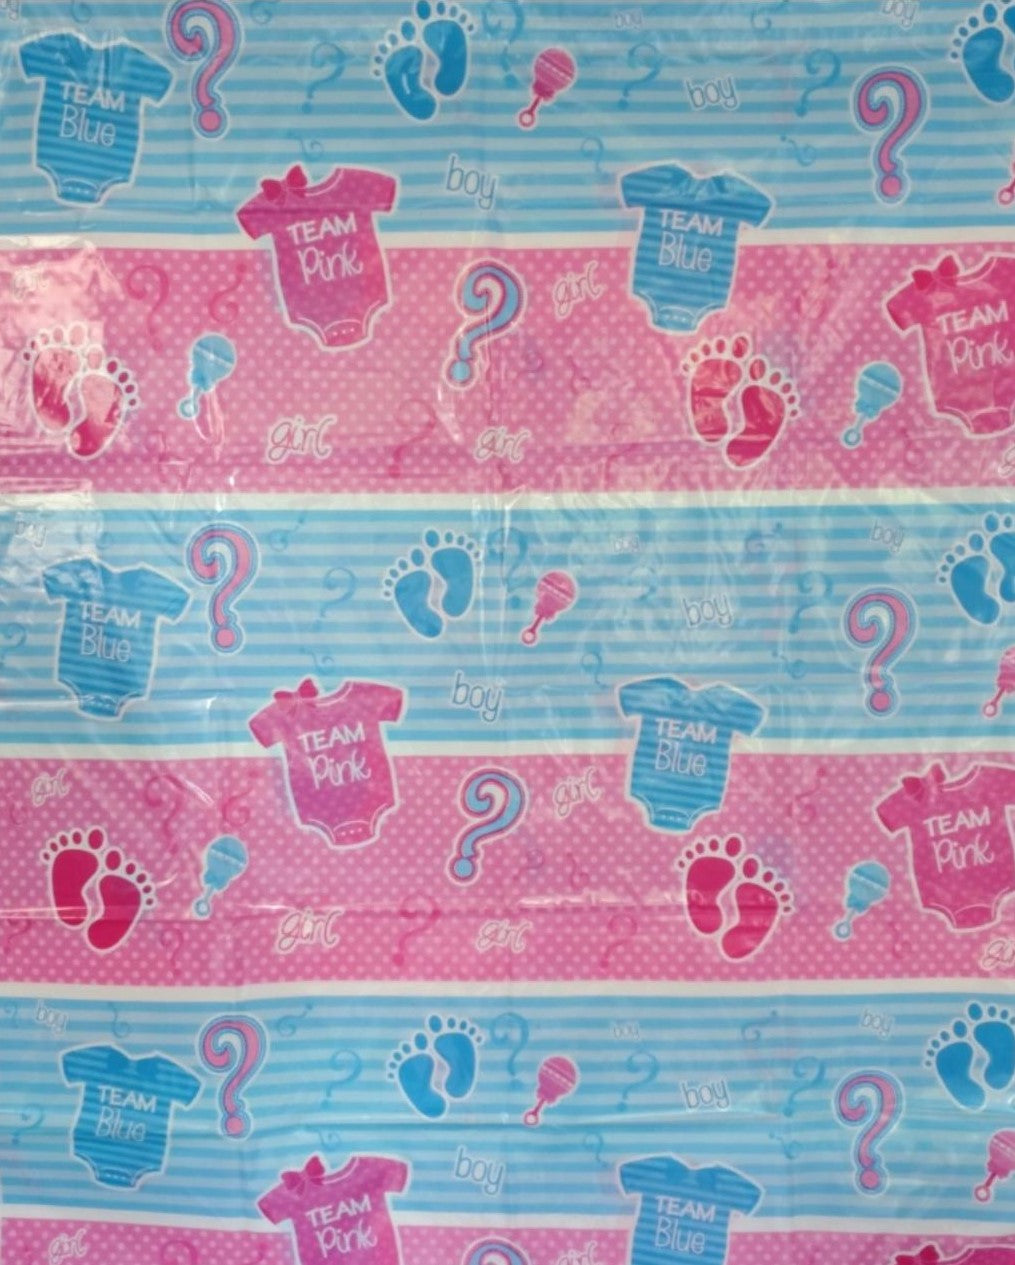 Gender Reveal Is it a boy or girl? bag and pink balloons - 1 piece